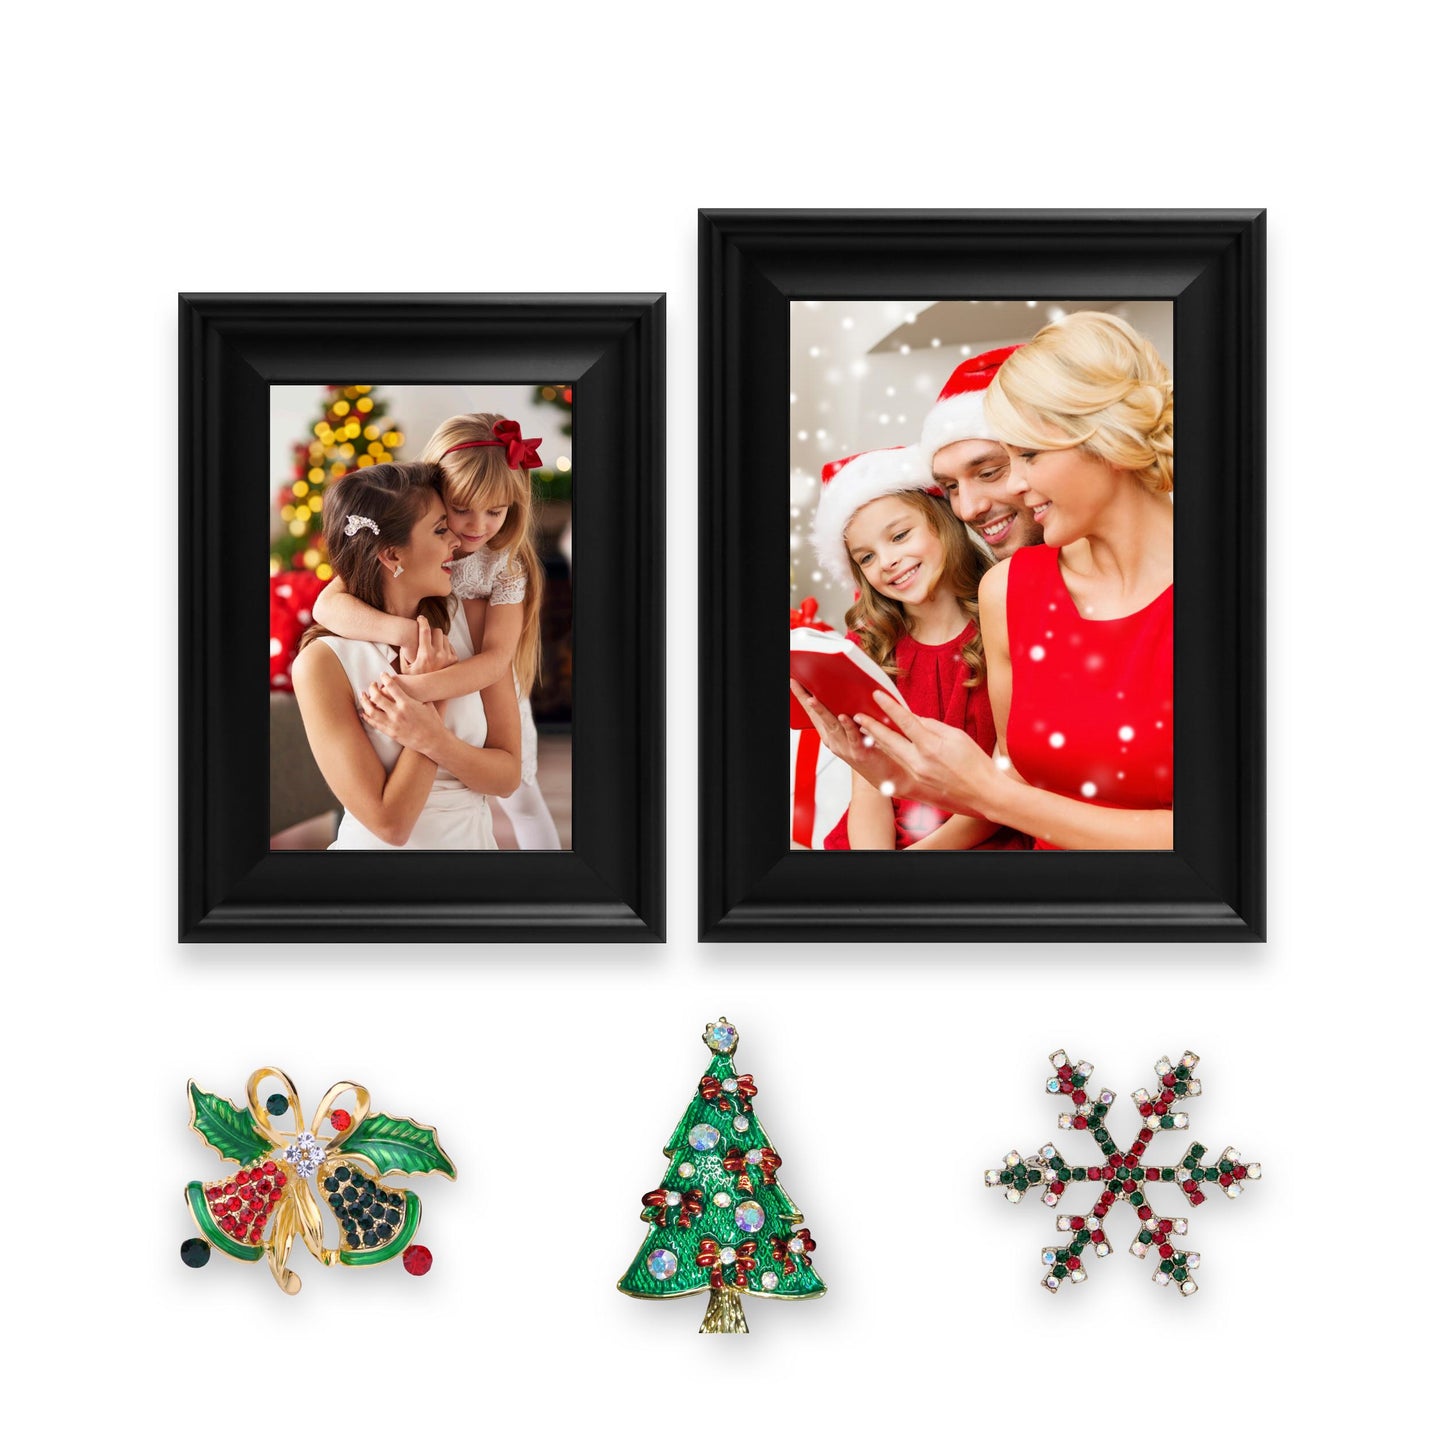 Christmas Picture Frame Photo Frame Embellished Gift for Wall and Tabletop Display (5x7 and 4x6, Black)